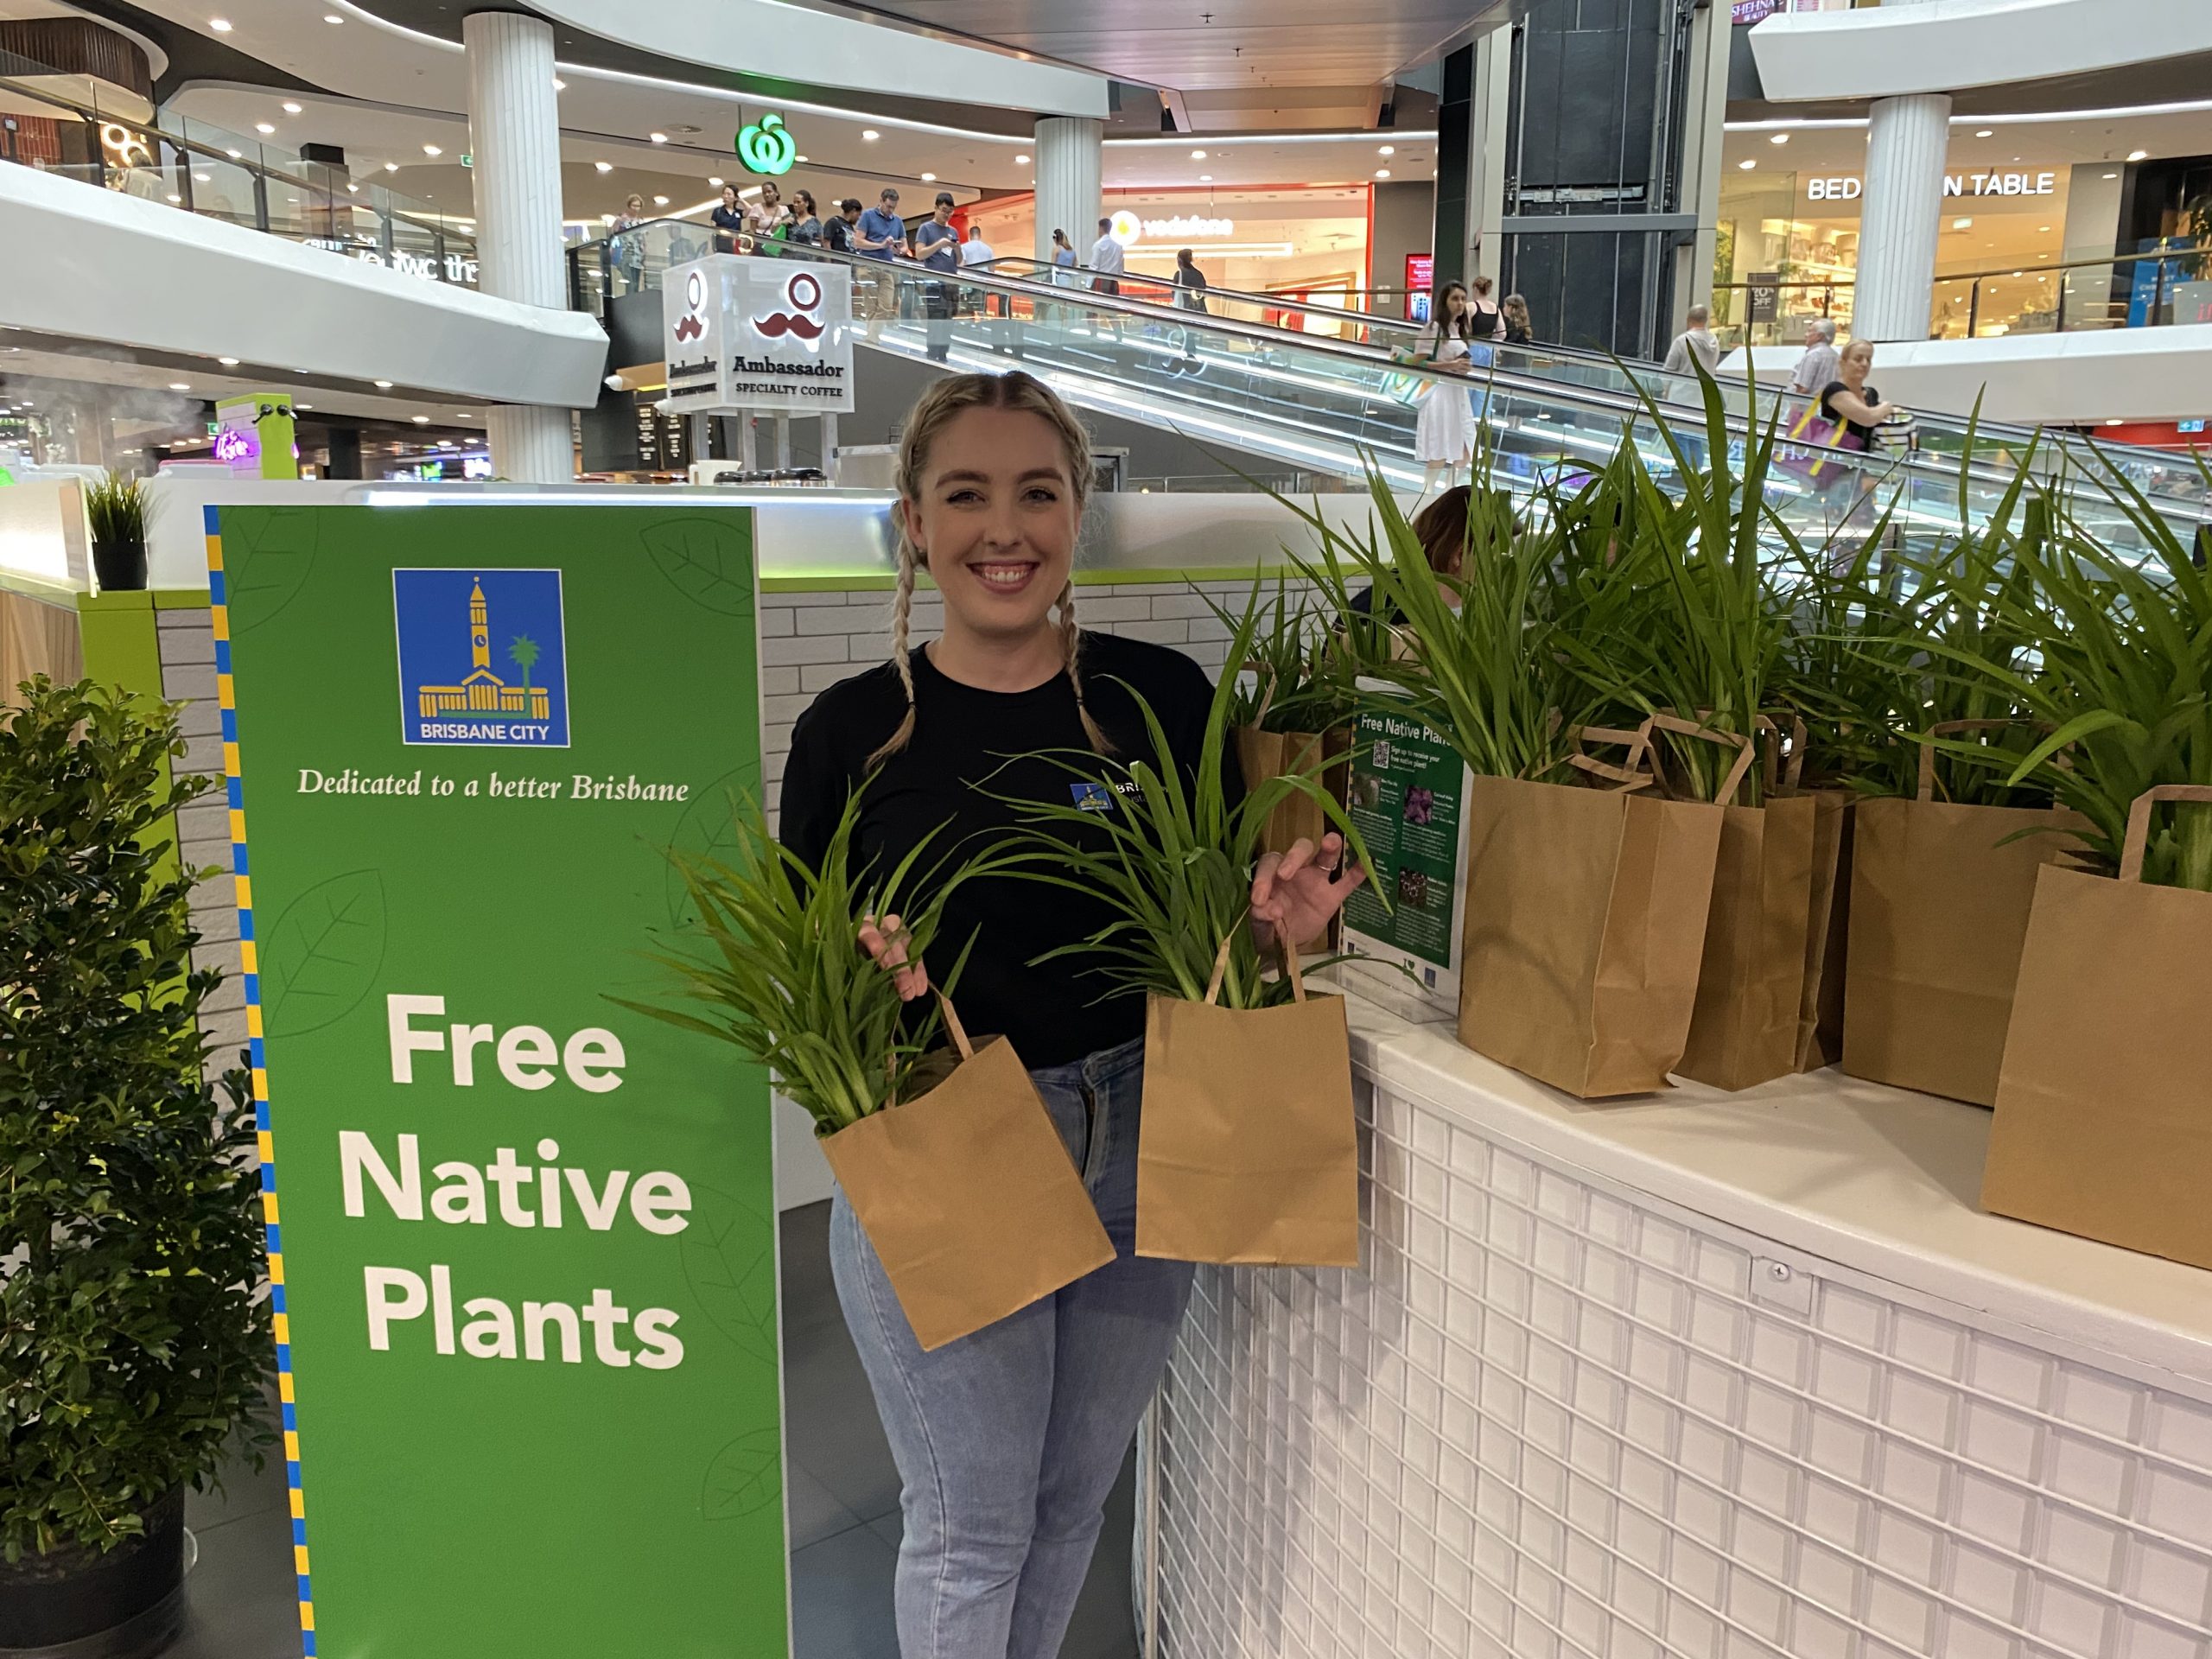 Lady holding plants at a stall